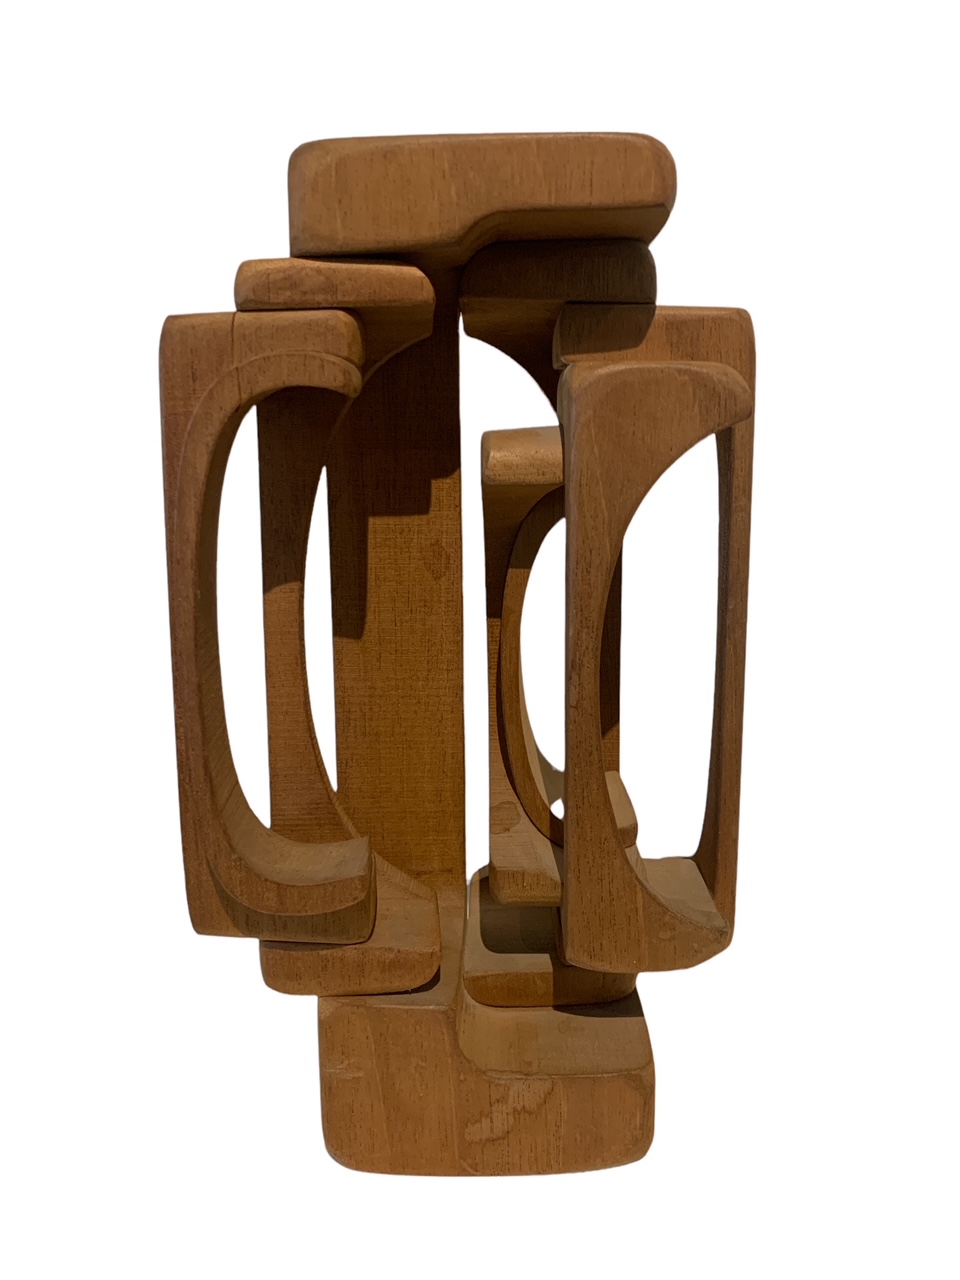 BRIAN WILLSHER, BRITISH, 1930 - 2010, A 20TH CENTURY CARVED WOOD ABSTRACT SCULPTURE Articulated